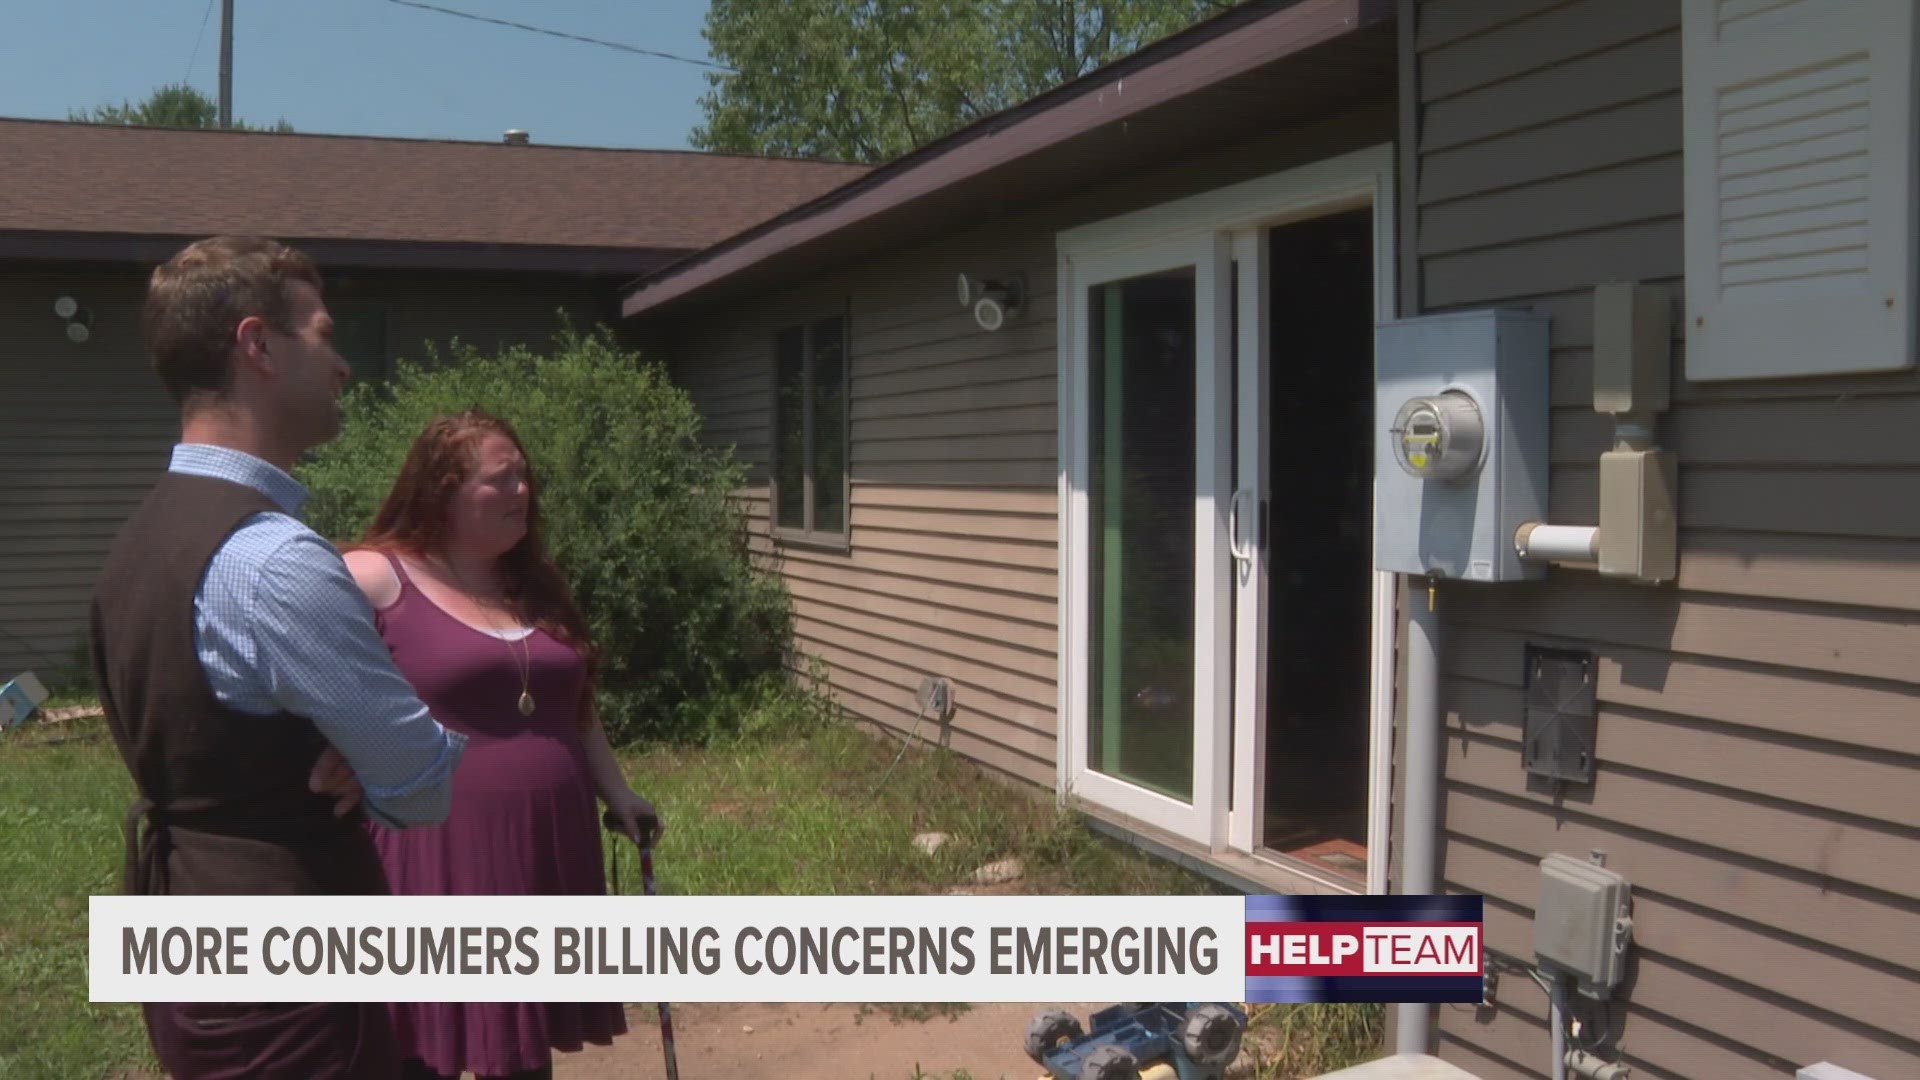 13 ON YOUR SIDE's Help Team has met with more people having concerning bills from Consumers Energy.